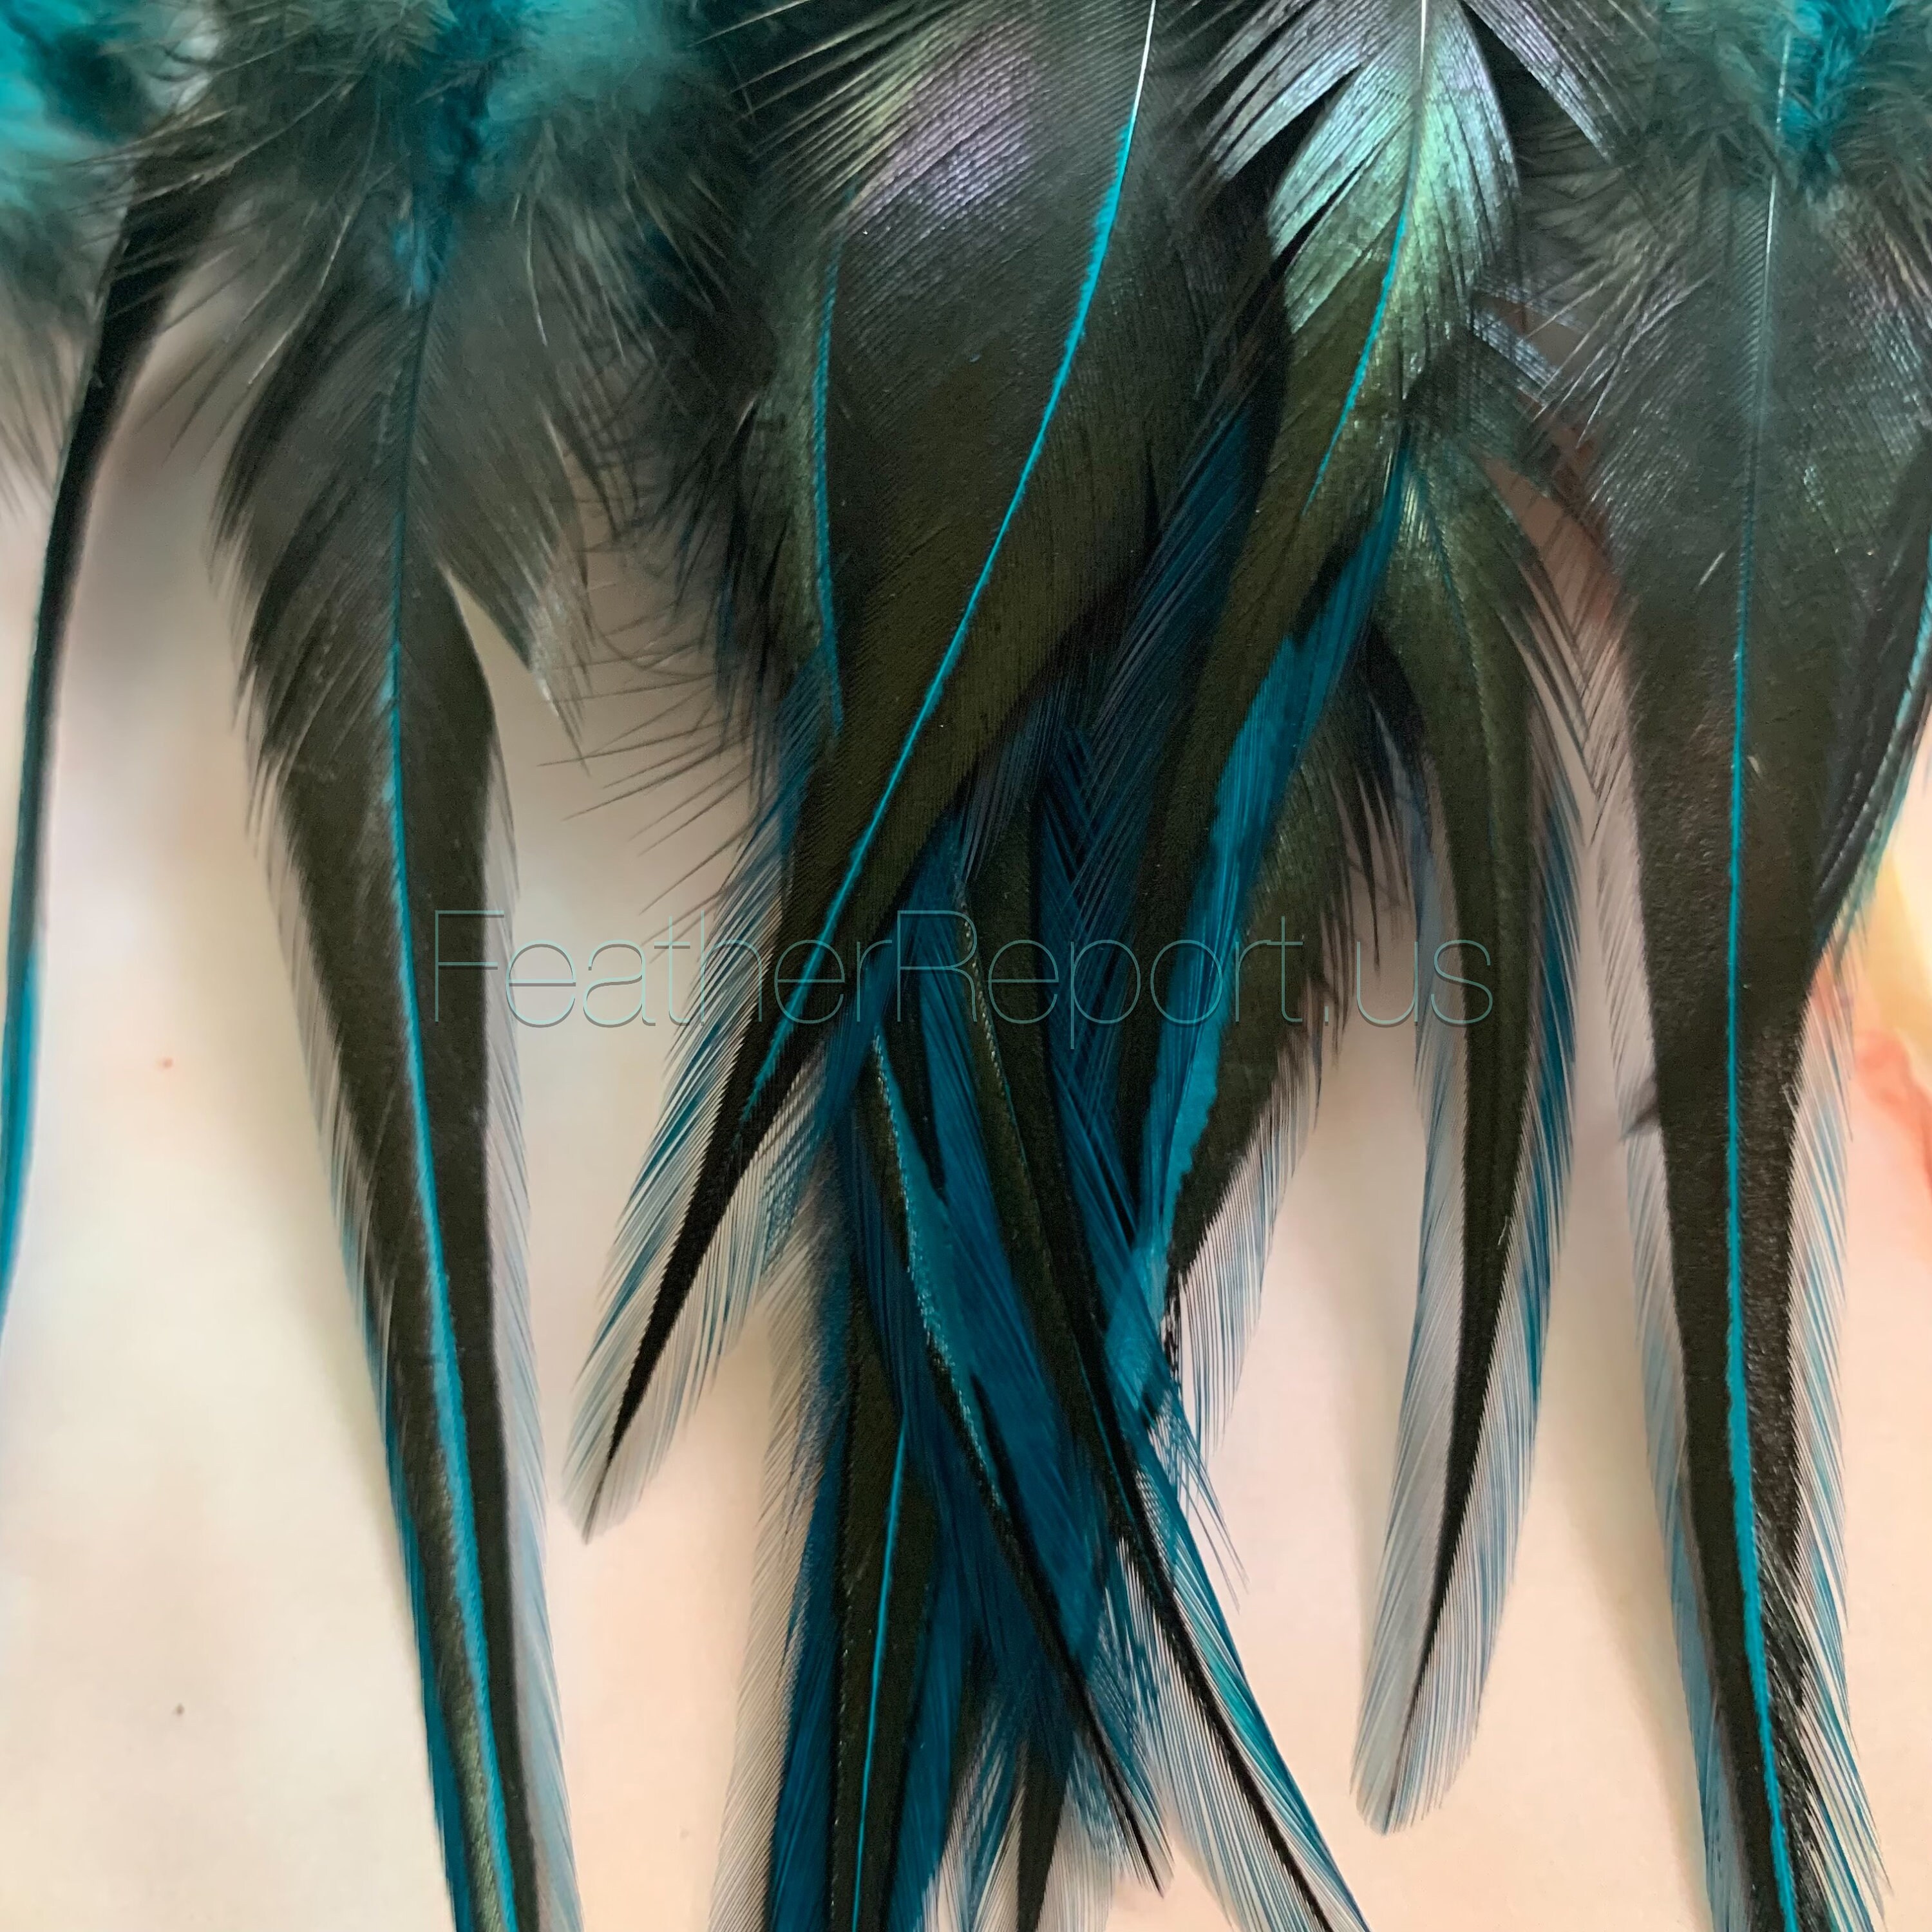 Hair Feather Kit XL Salon Extension Feathers Rooster Feathers Dyed